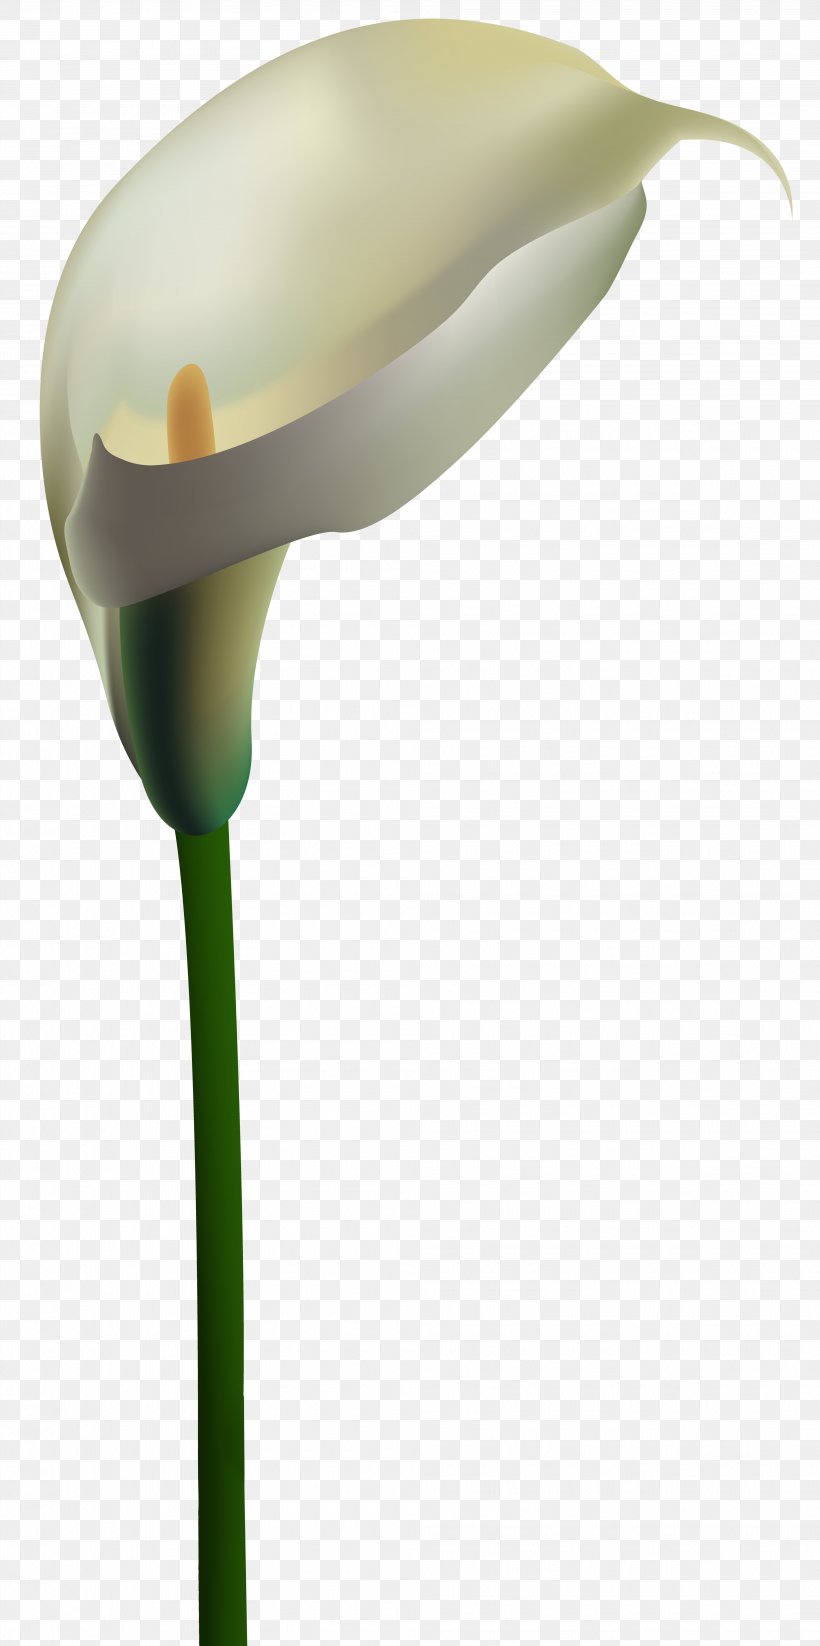 Image File Formats Lossless Compression, PNG, 3985x8000px, Arum Lily, Blog, Calla Lily, Digital Media, Drawing Download Free